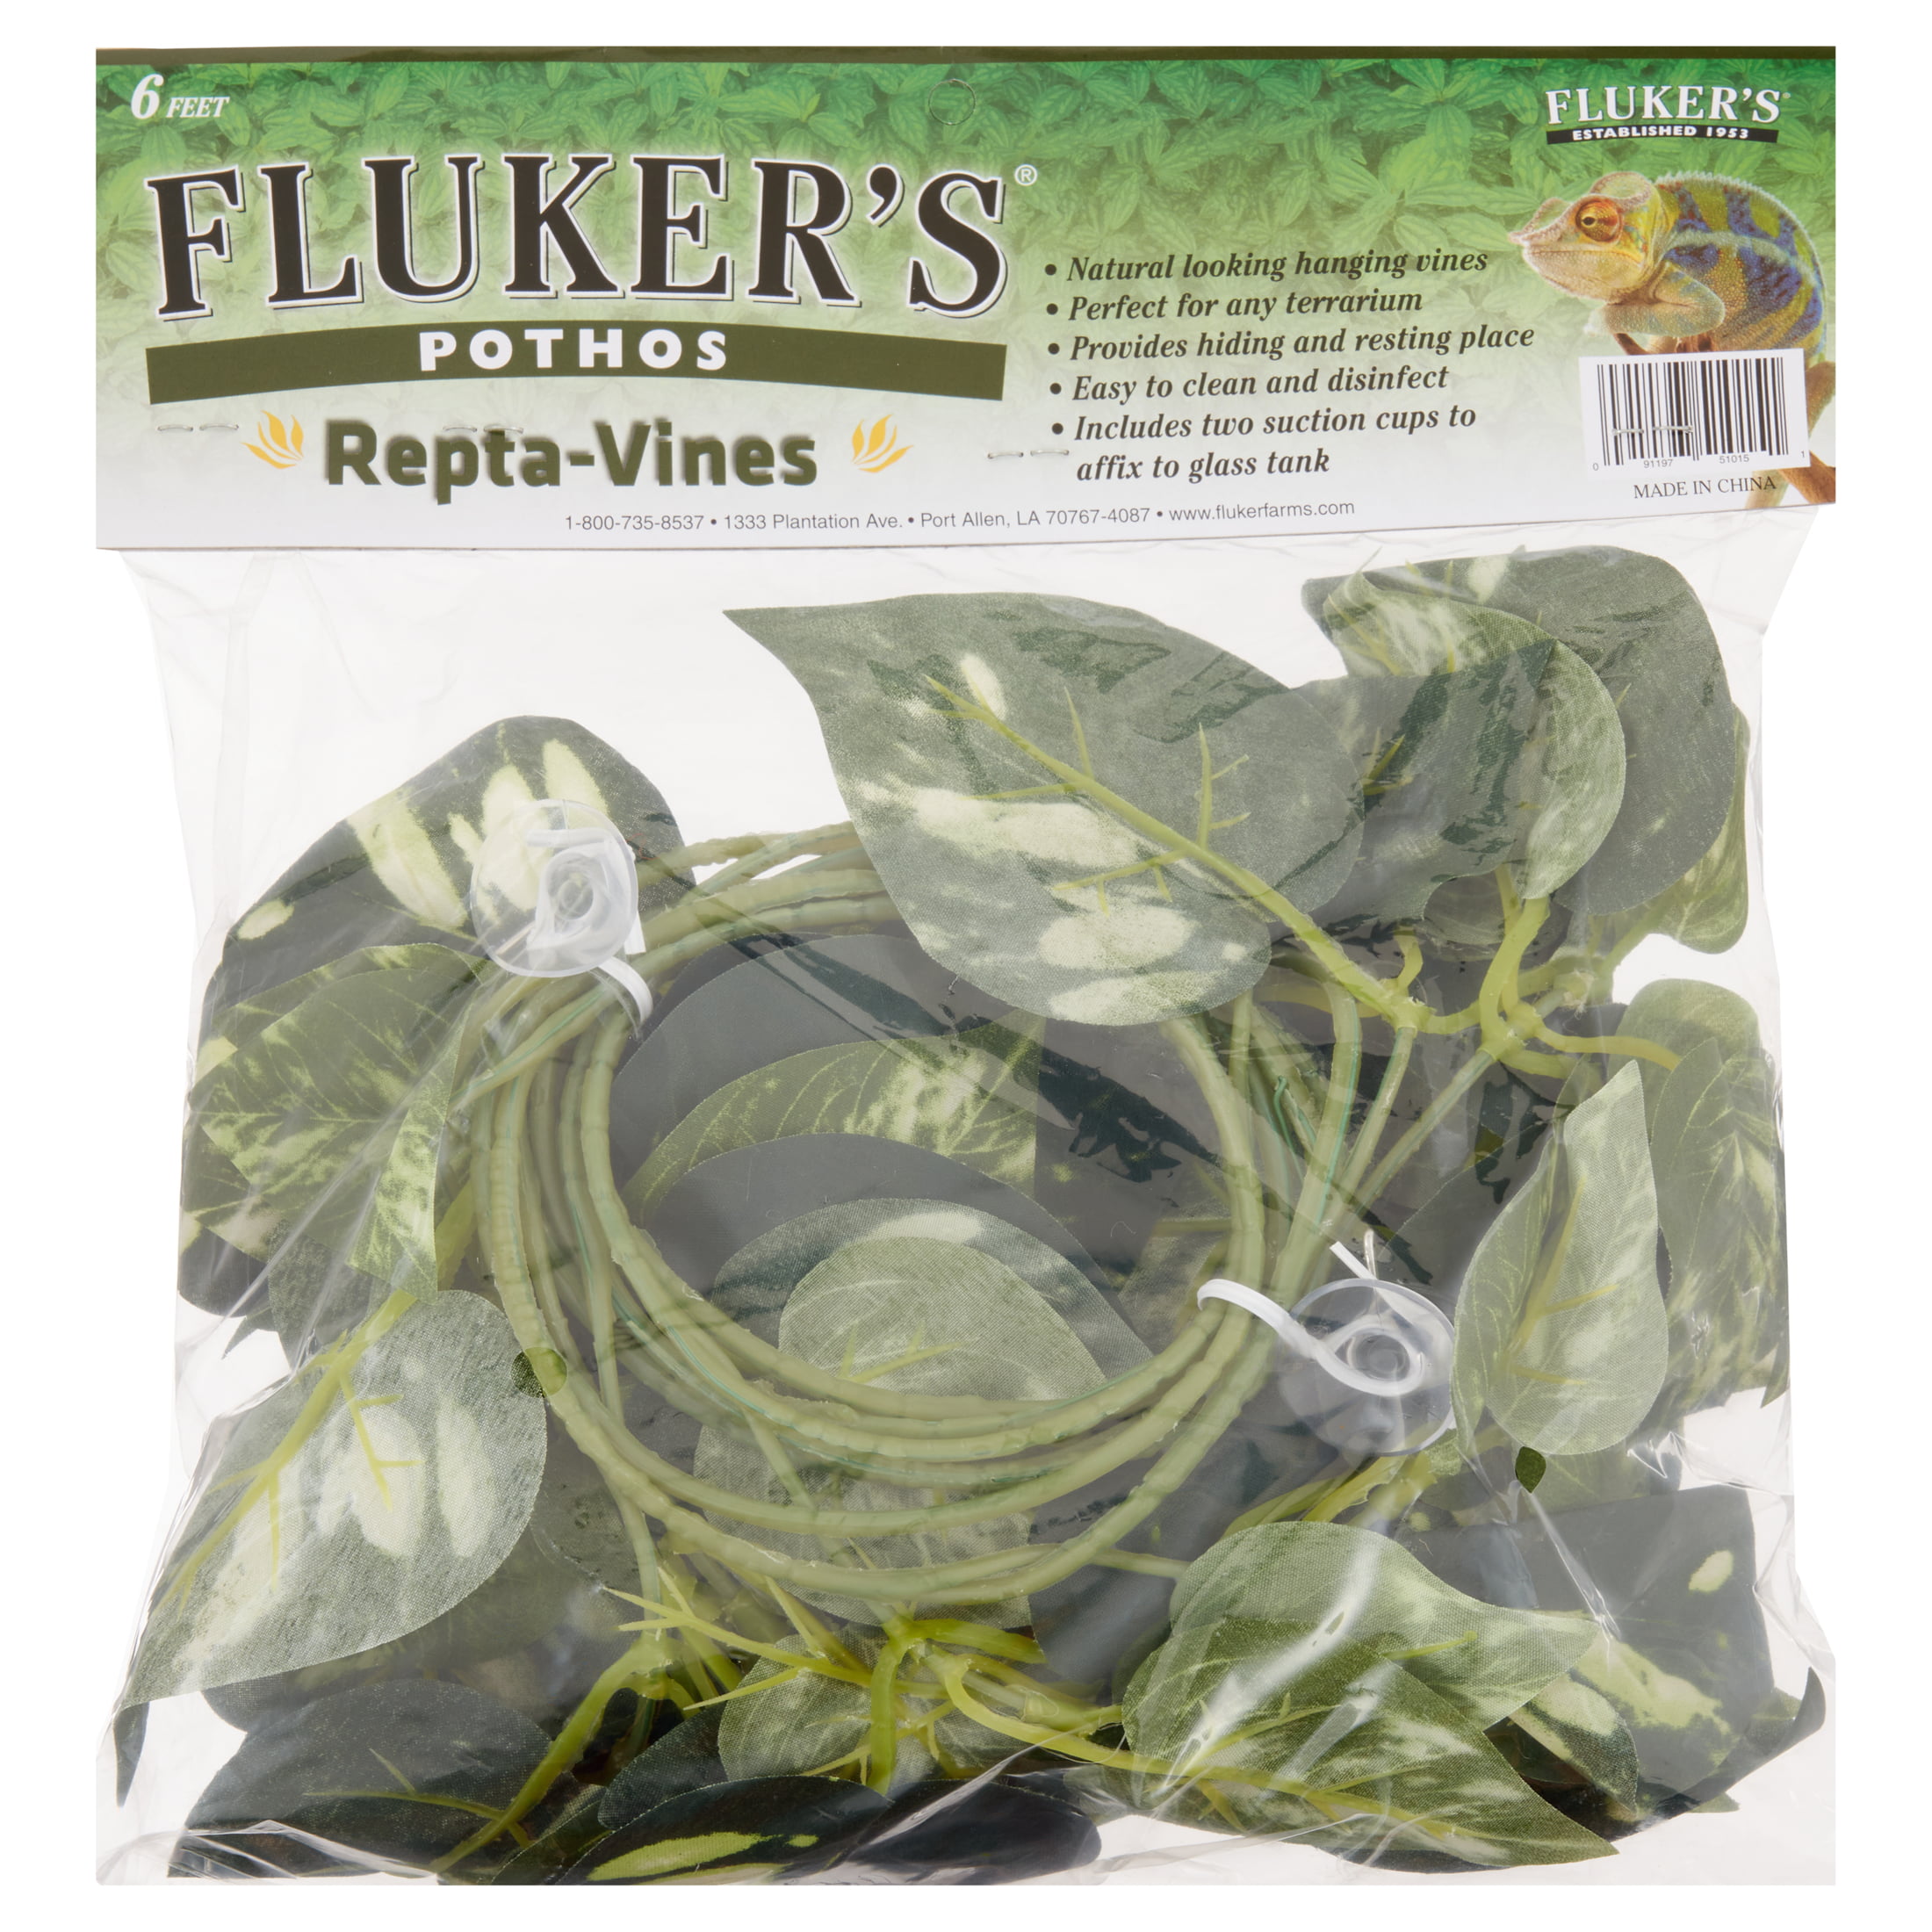 Flukers Pothos Repta Vines for Reptiles and Amphibians 